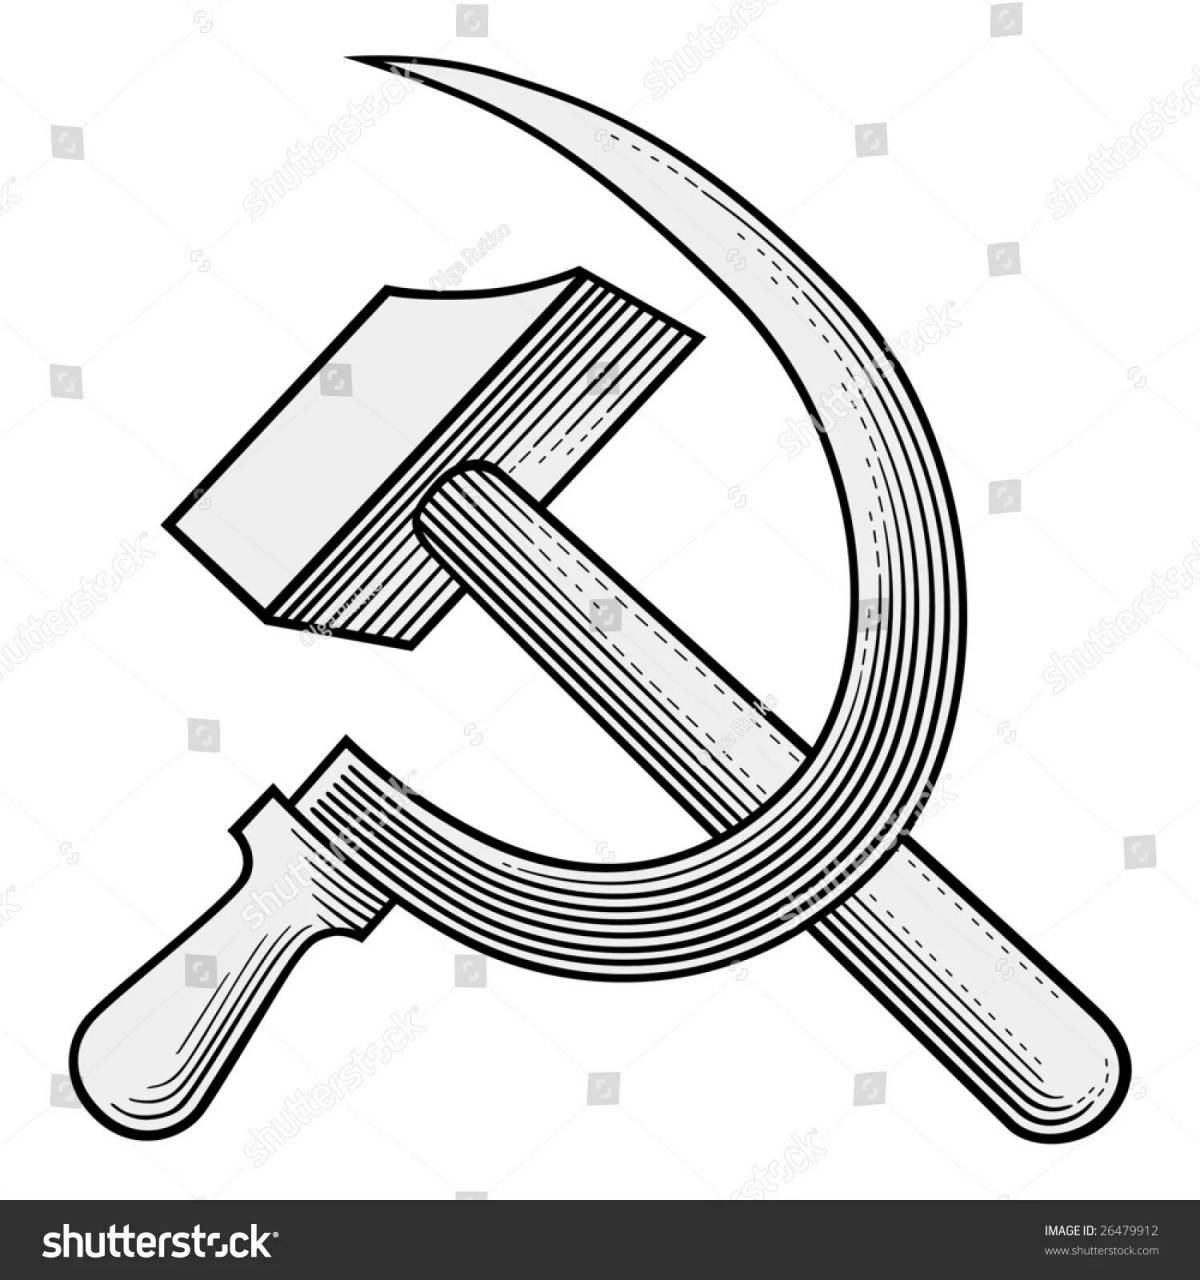 Creative hammer and sickle coloring